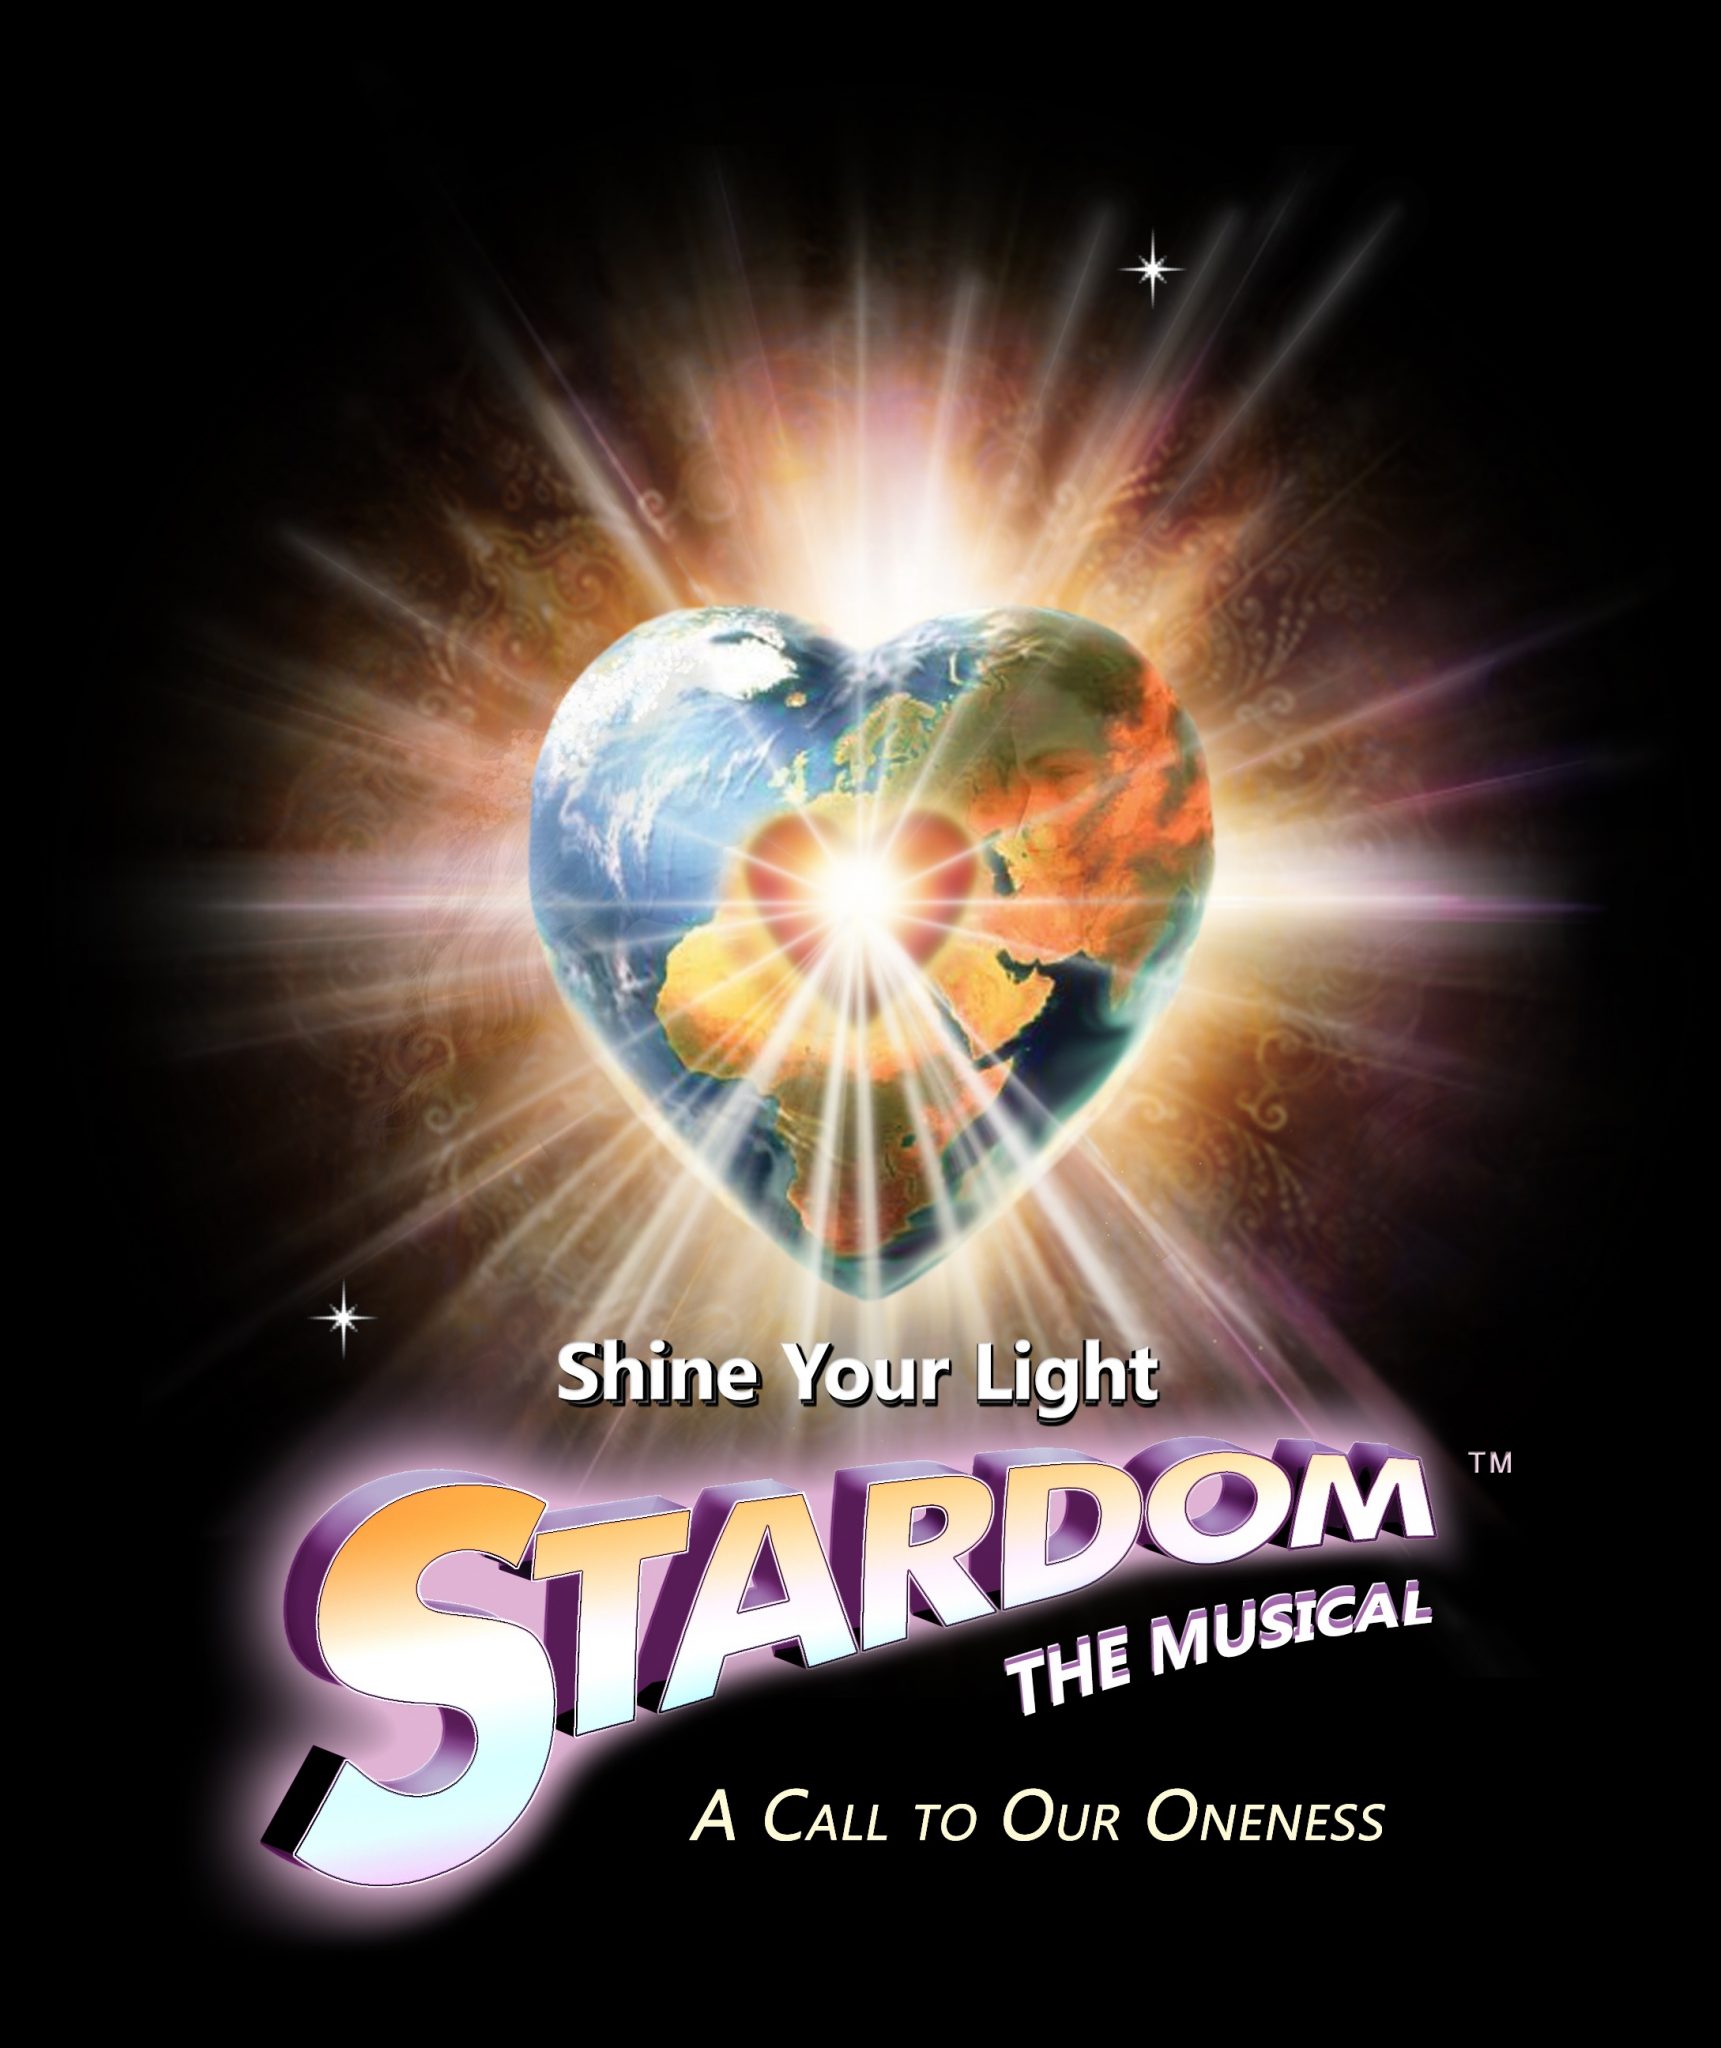 Online Auditions for Stardom, the Musical | Auditions Free